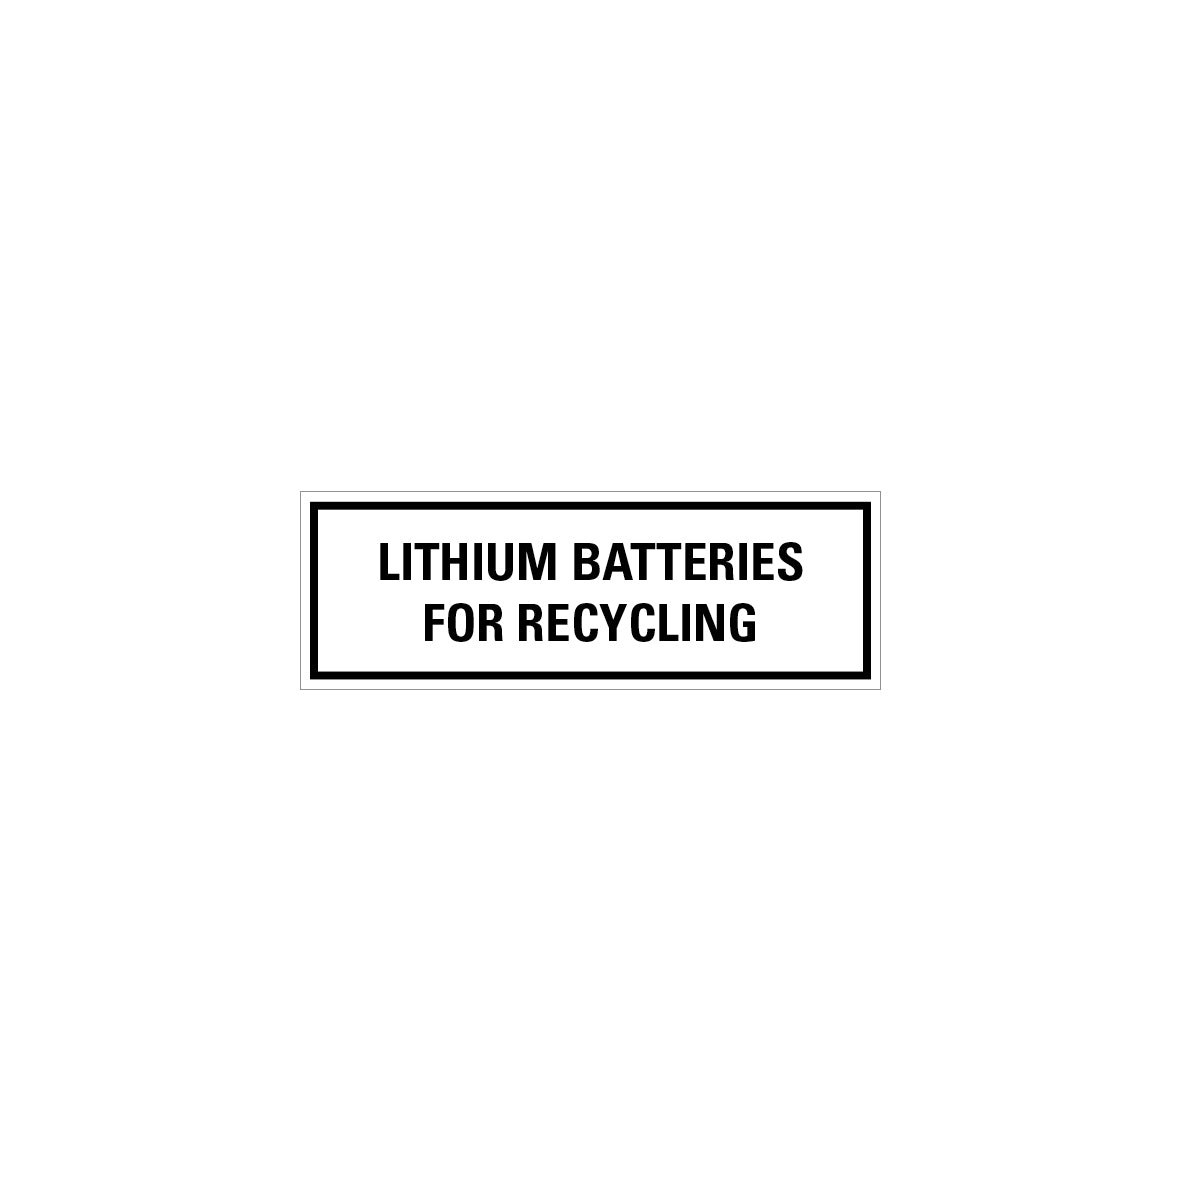 Gefahrstoff Batterien, Lithium Batteries for Recycling, 5.0414, 150 x 50 mm, Ro 500 Stk.